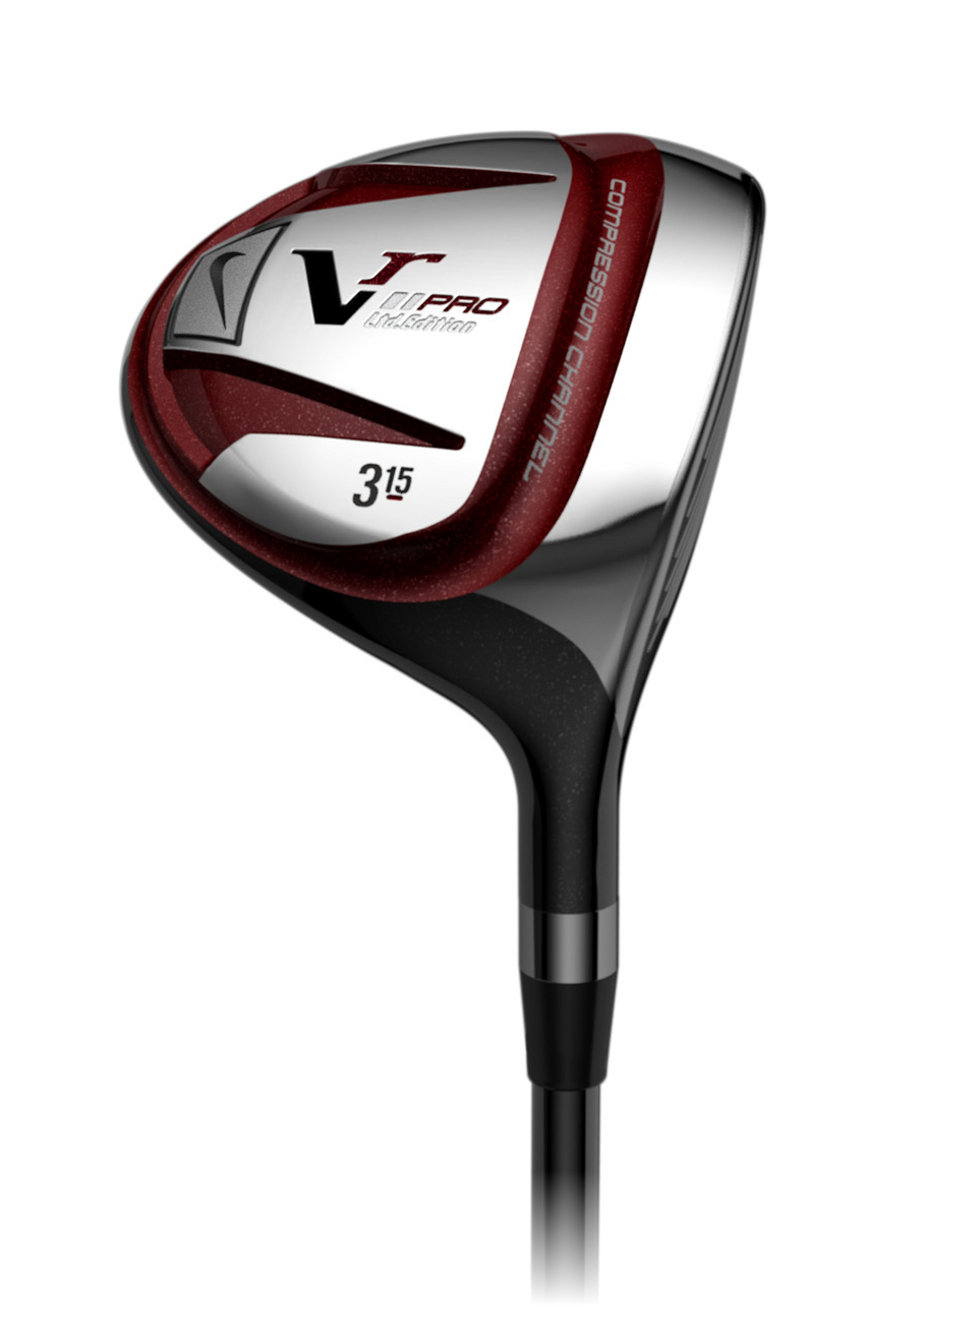 Nike VR Pro Limited Edition Fairway